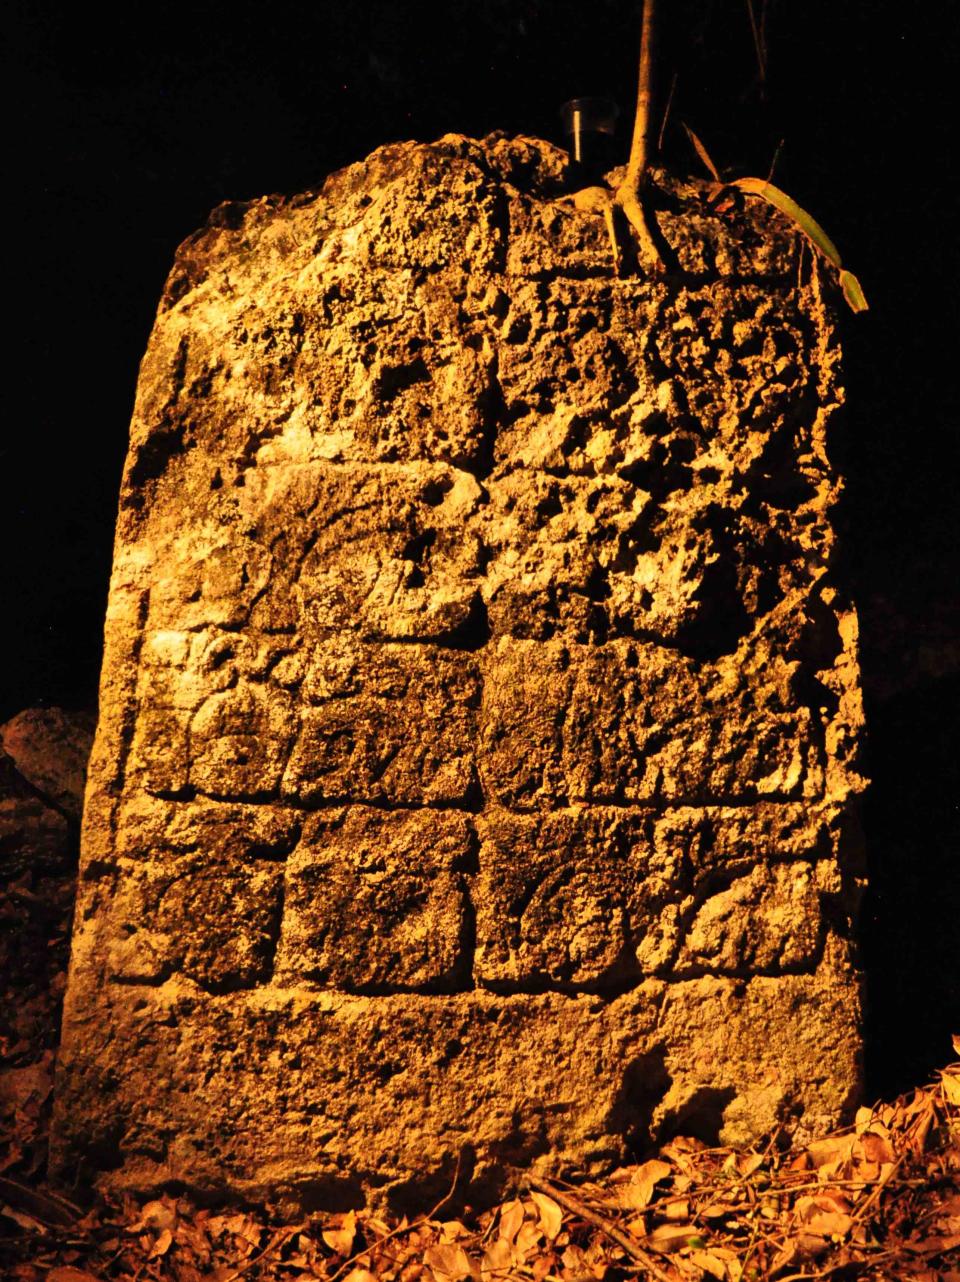 A photograph released to Reuters on August 22, 2014 shows a piece of a stela from an ancient Mayan city in Lagunita May 18, 2014. (REUTERS/Research Center of the Slovenian Academy of Sciences and Arts)